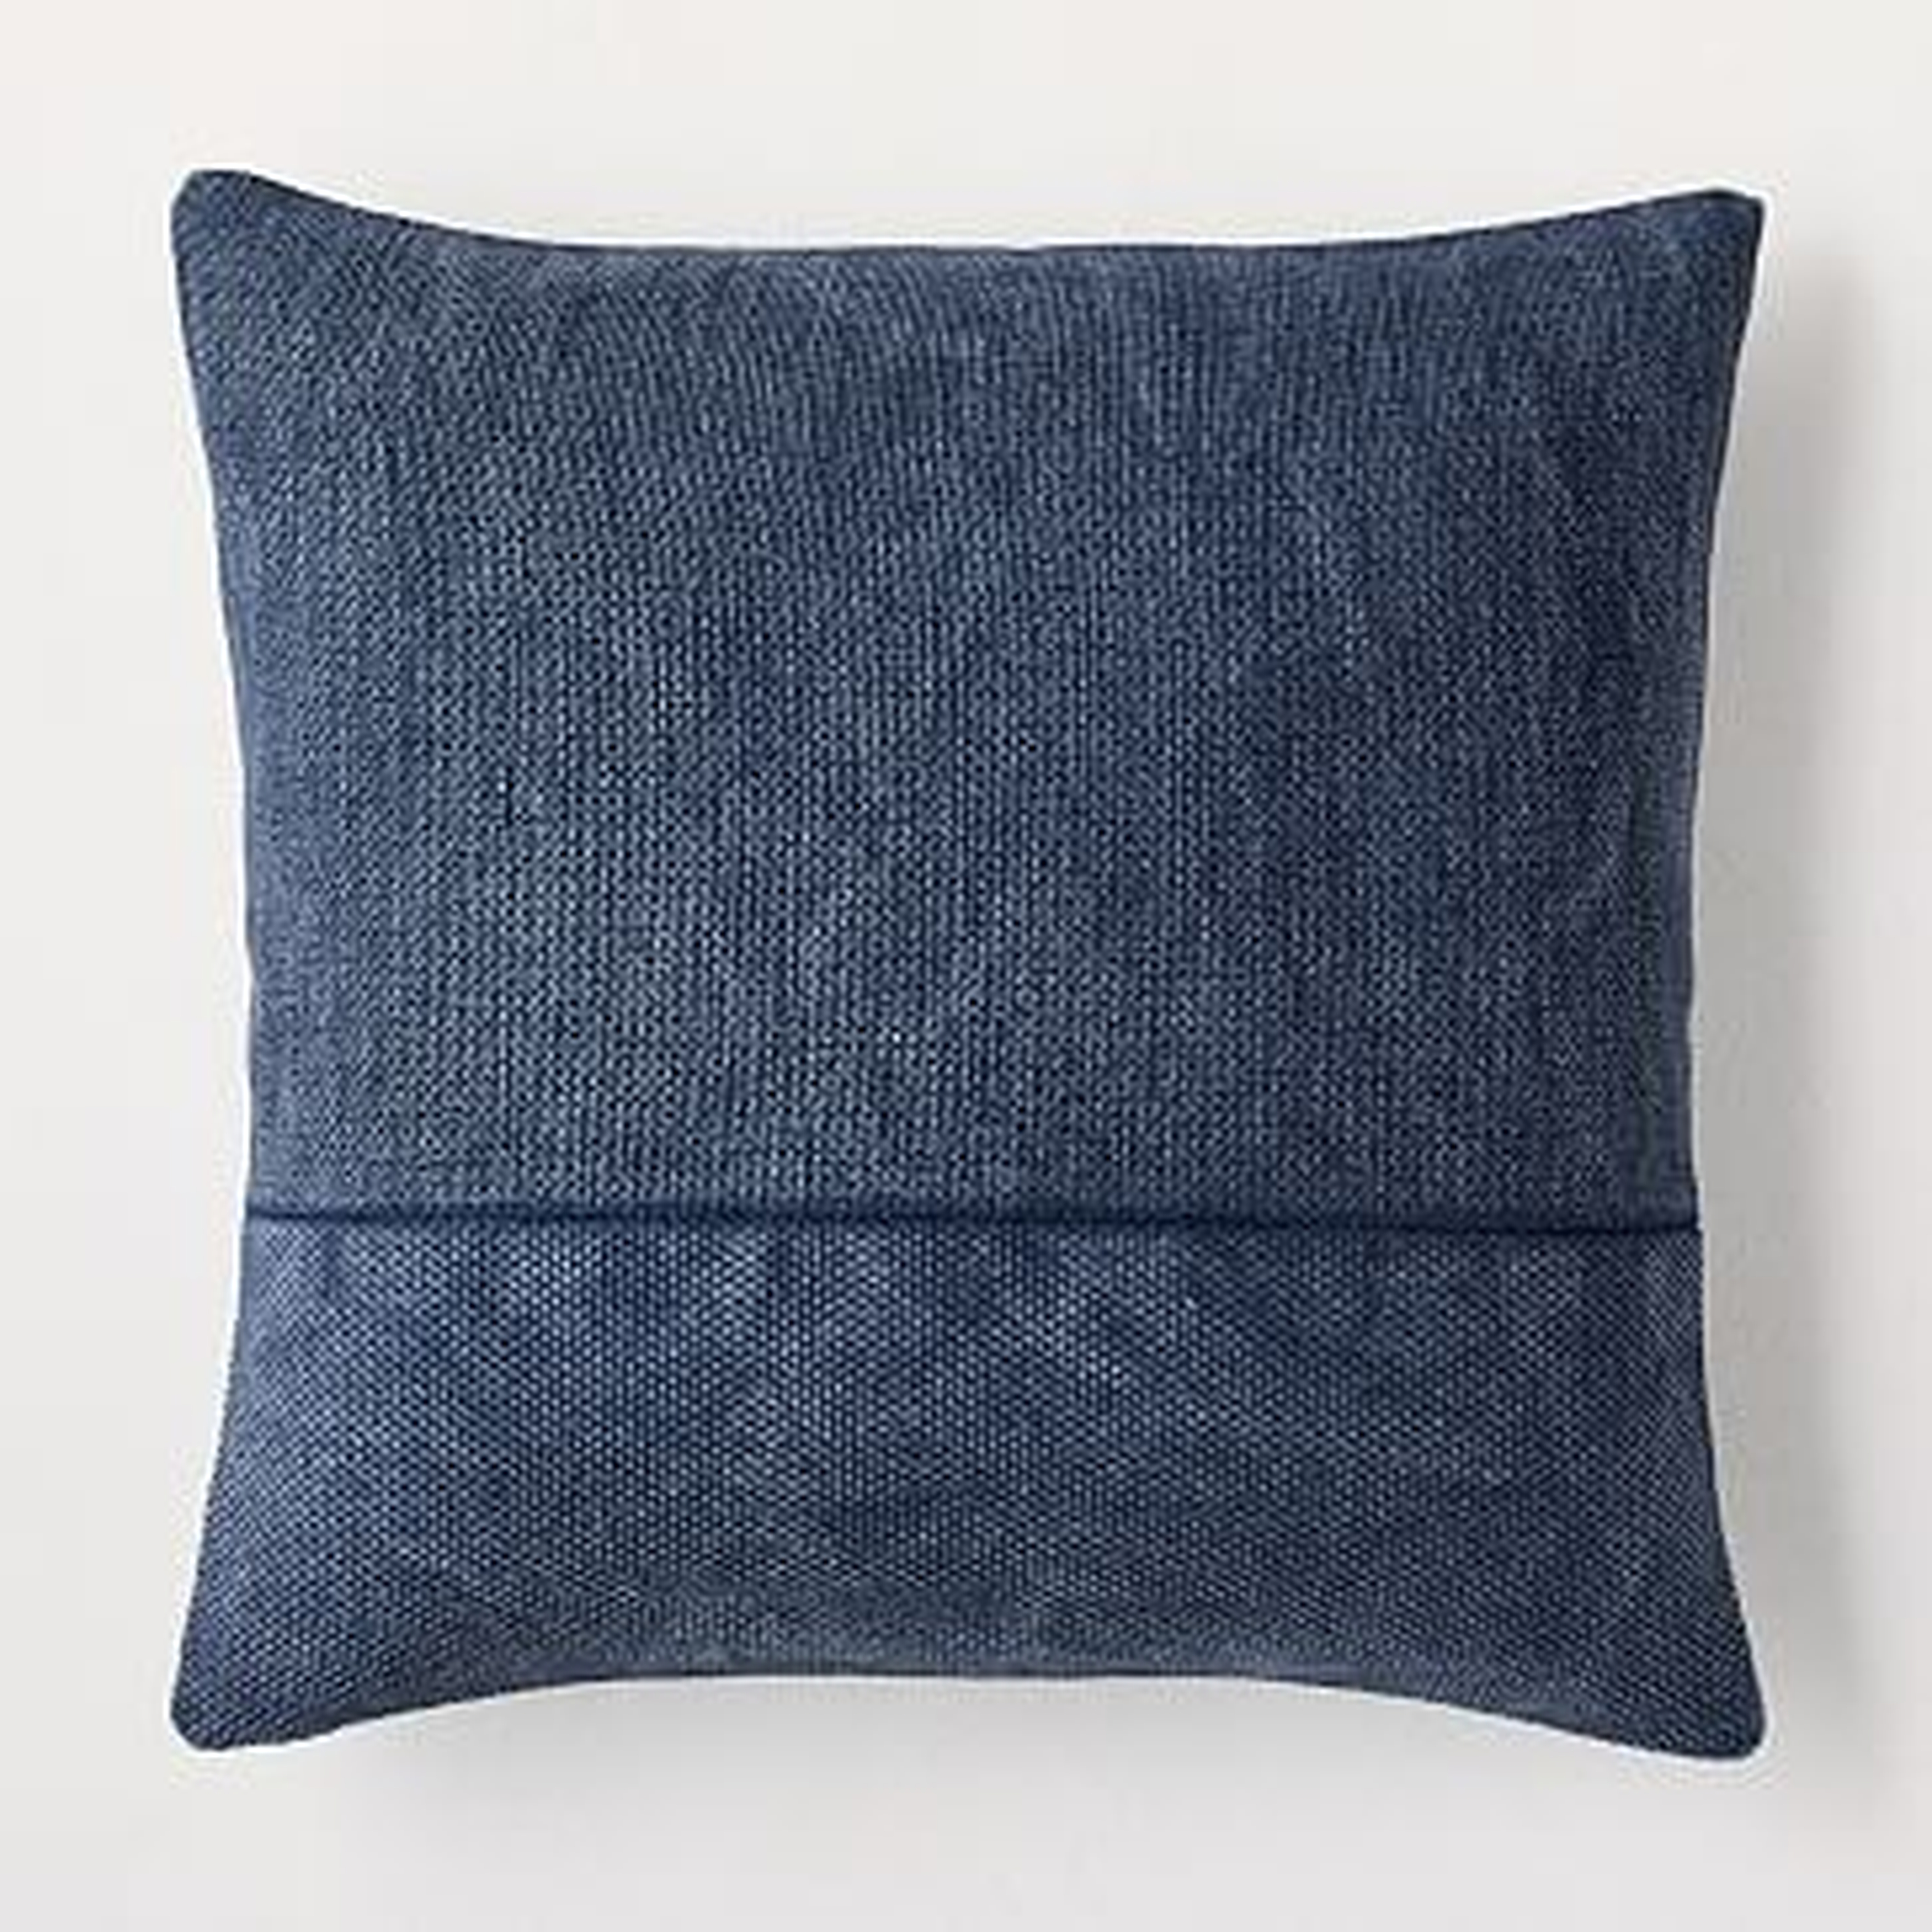 Cotton Canvas Pillow Cover, 18"x18", Midnight, Set of 2 - West Elm